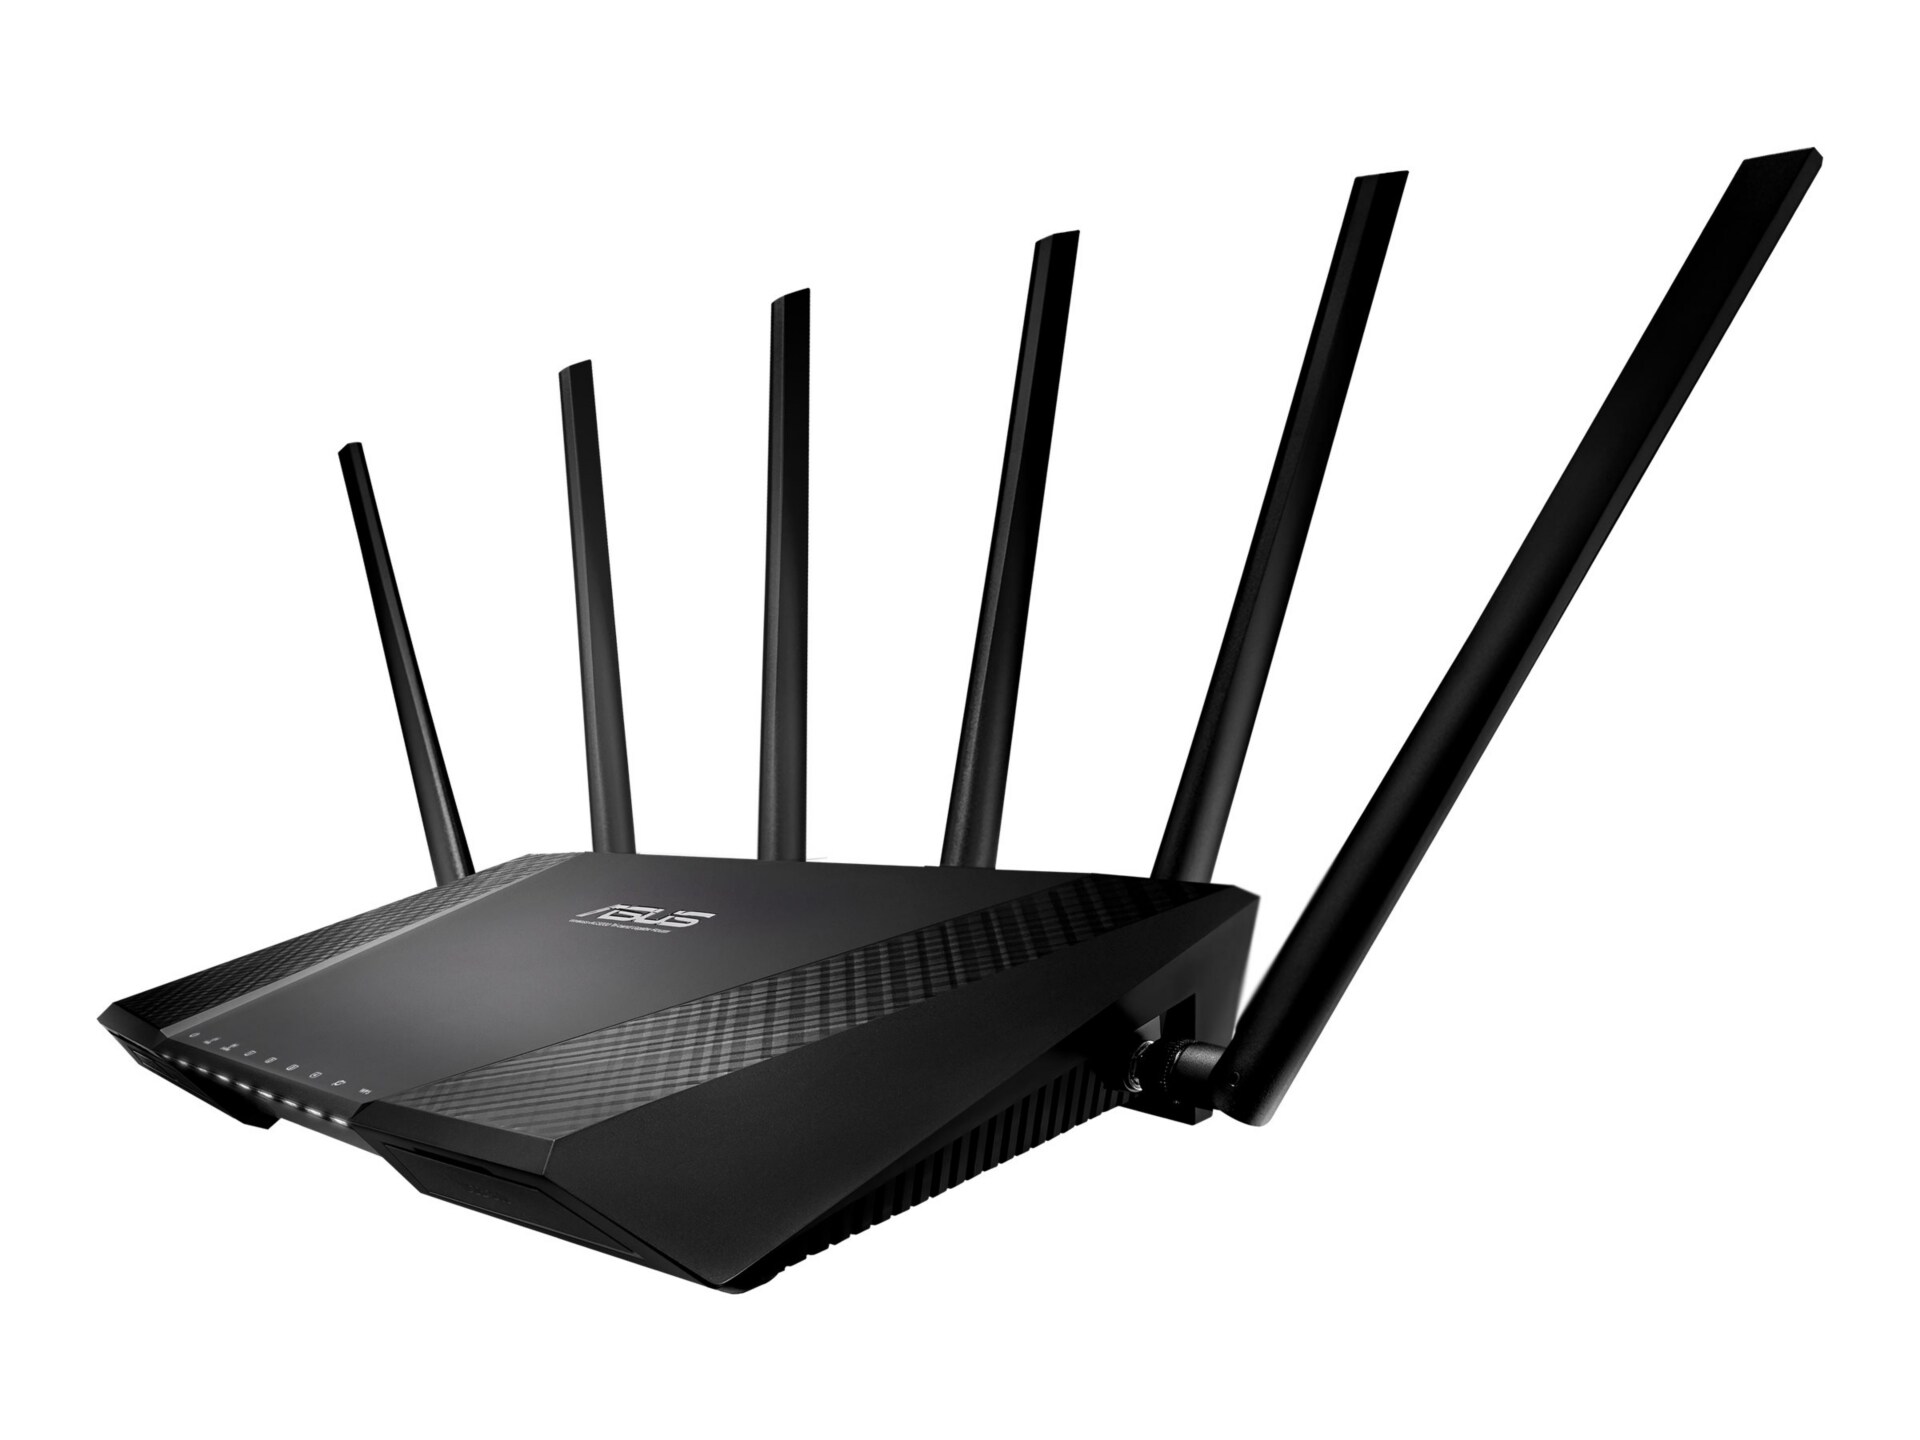 Asus RT-AC3200 Wireless Router